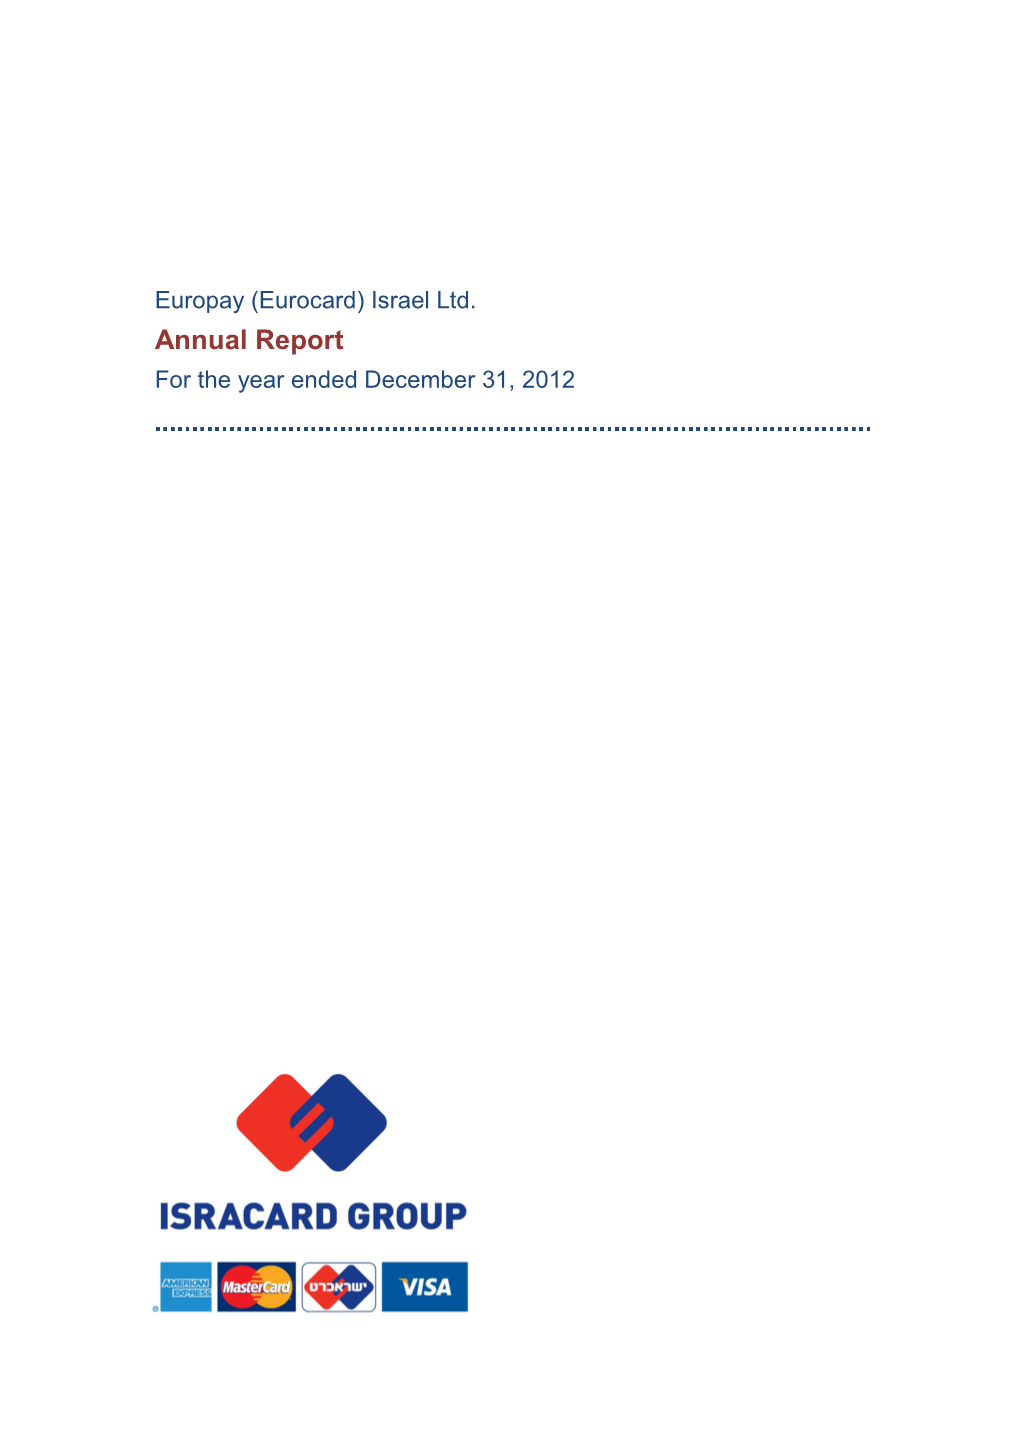 Israel Ltd. Annual Report for the Year Ended December 31, 2012